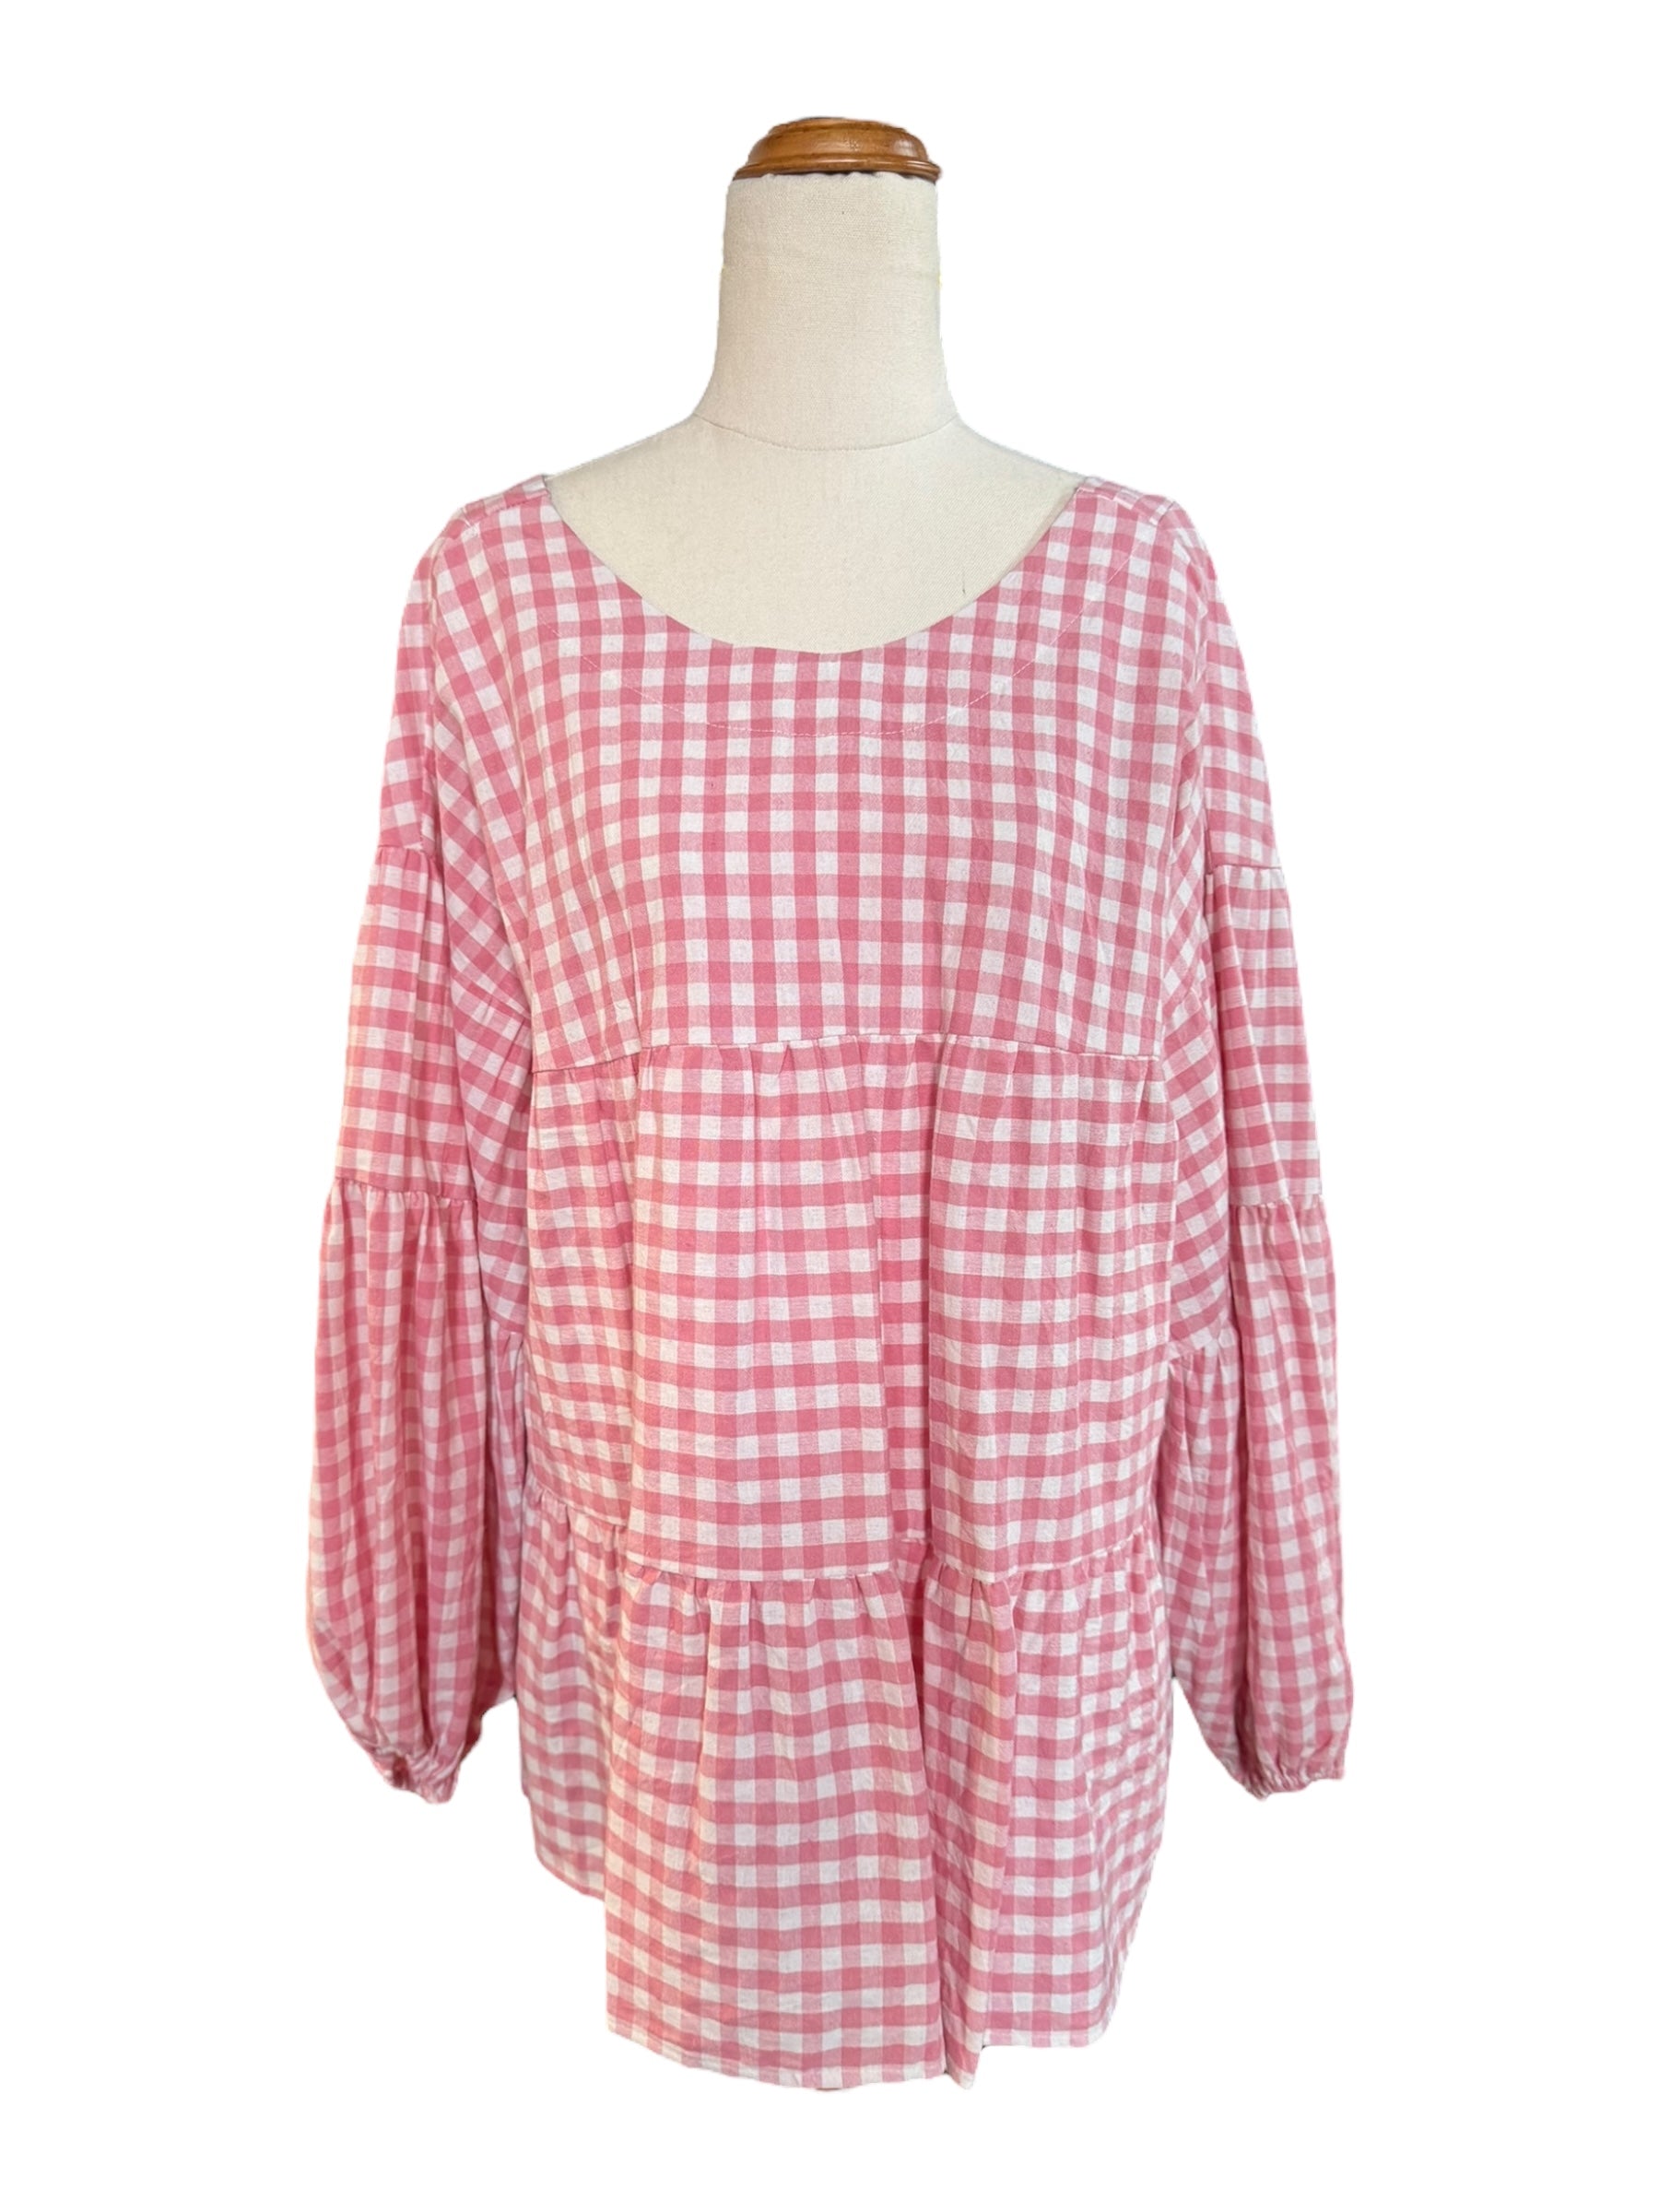 'Audrey' Gingham Bow Back Top - Pink